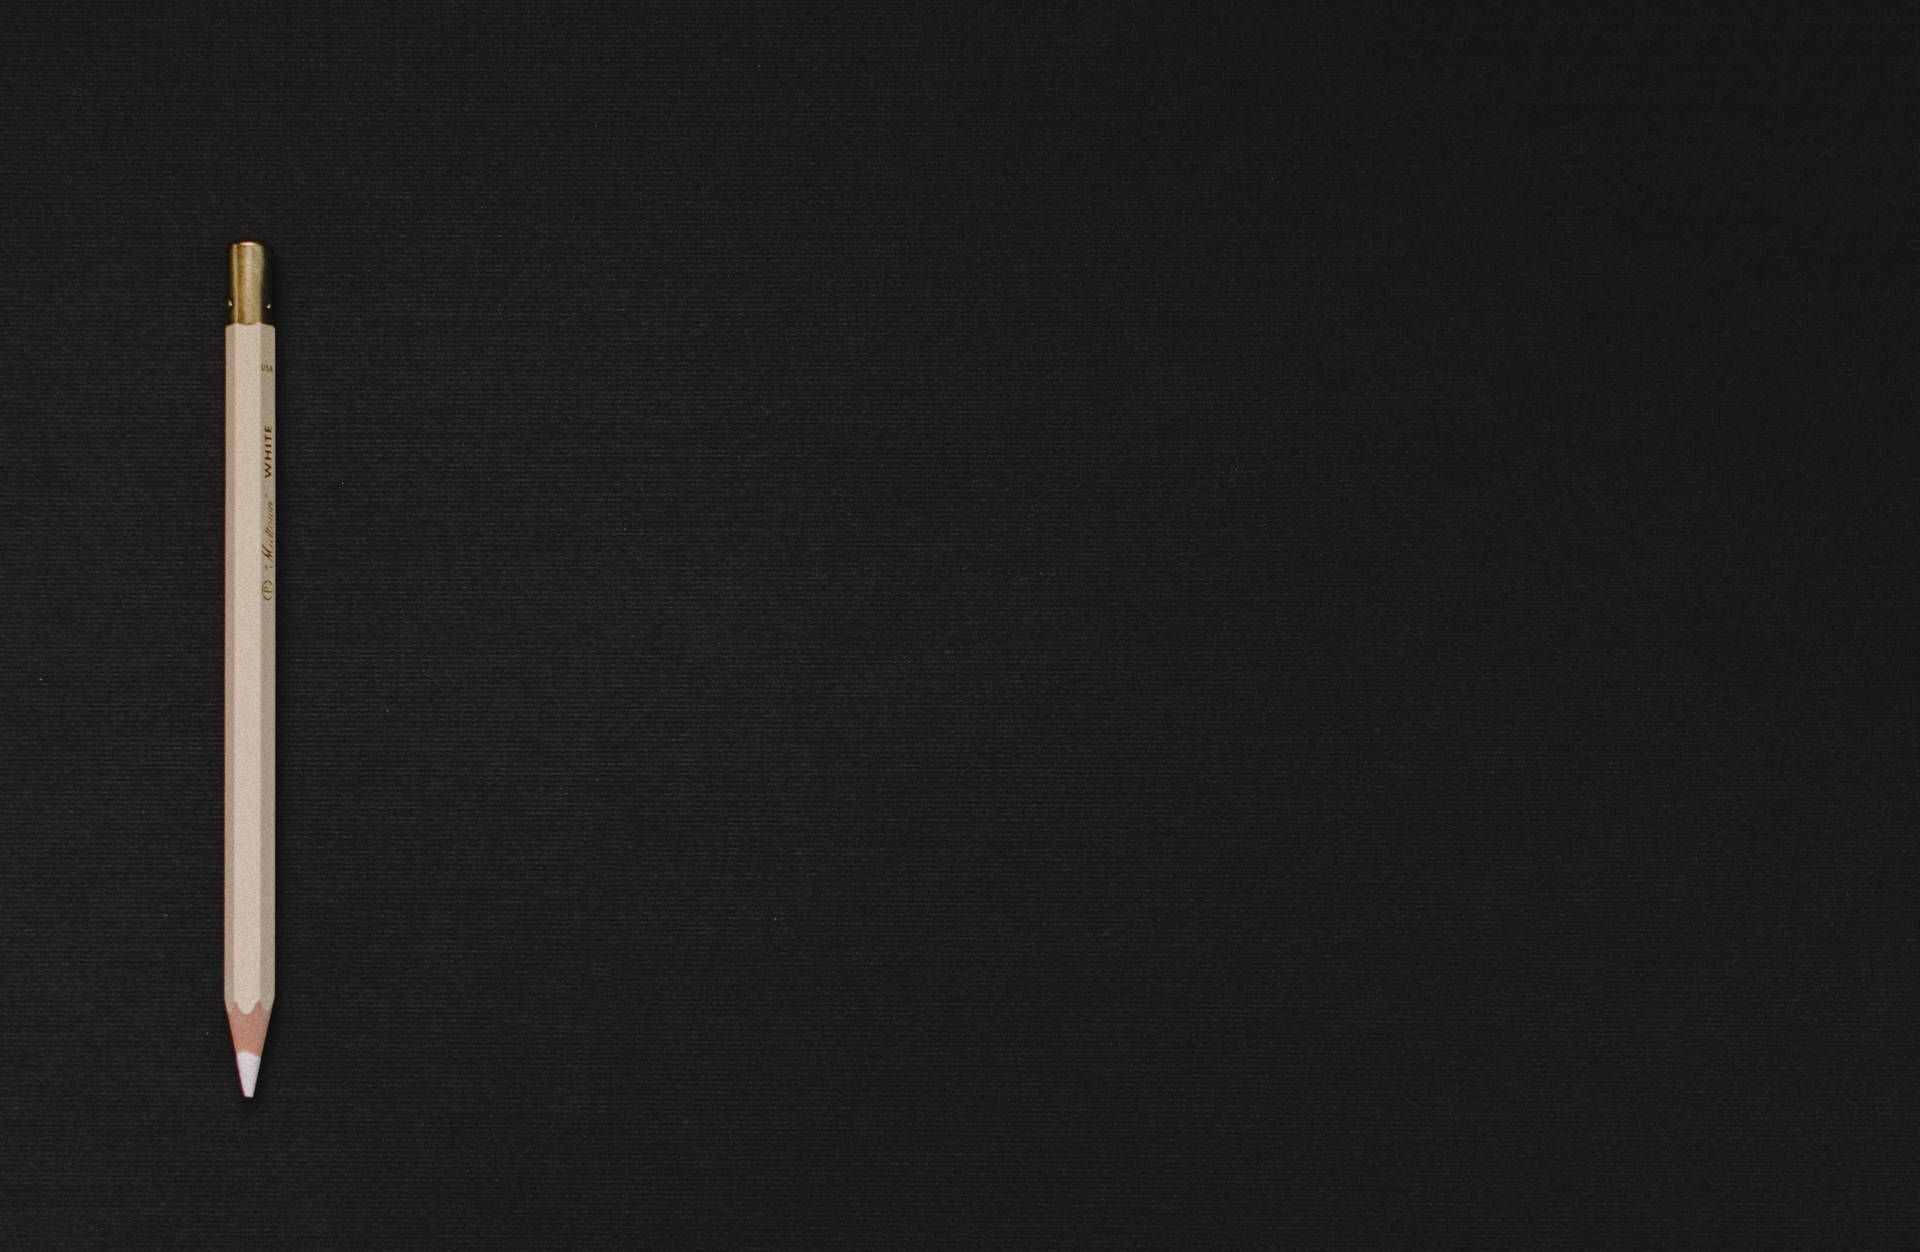 Black Table Page Wallpaper